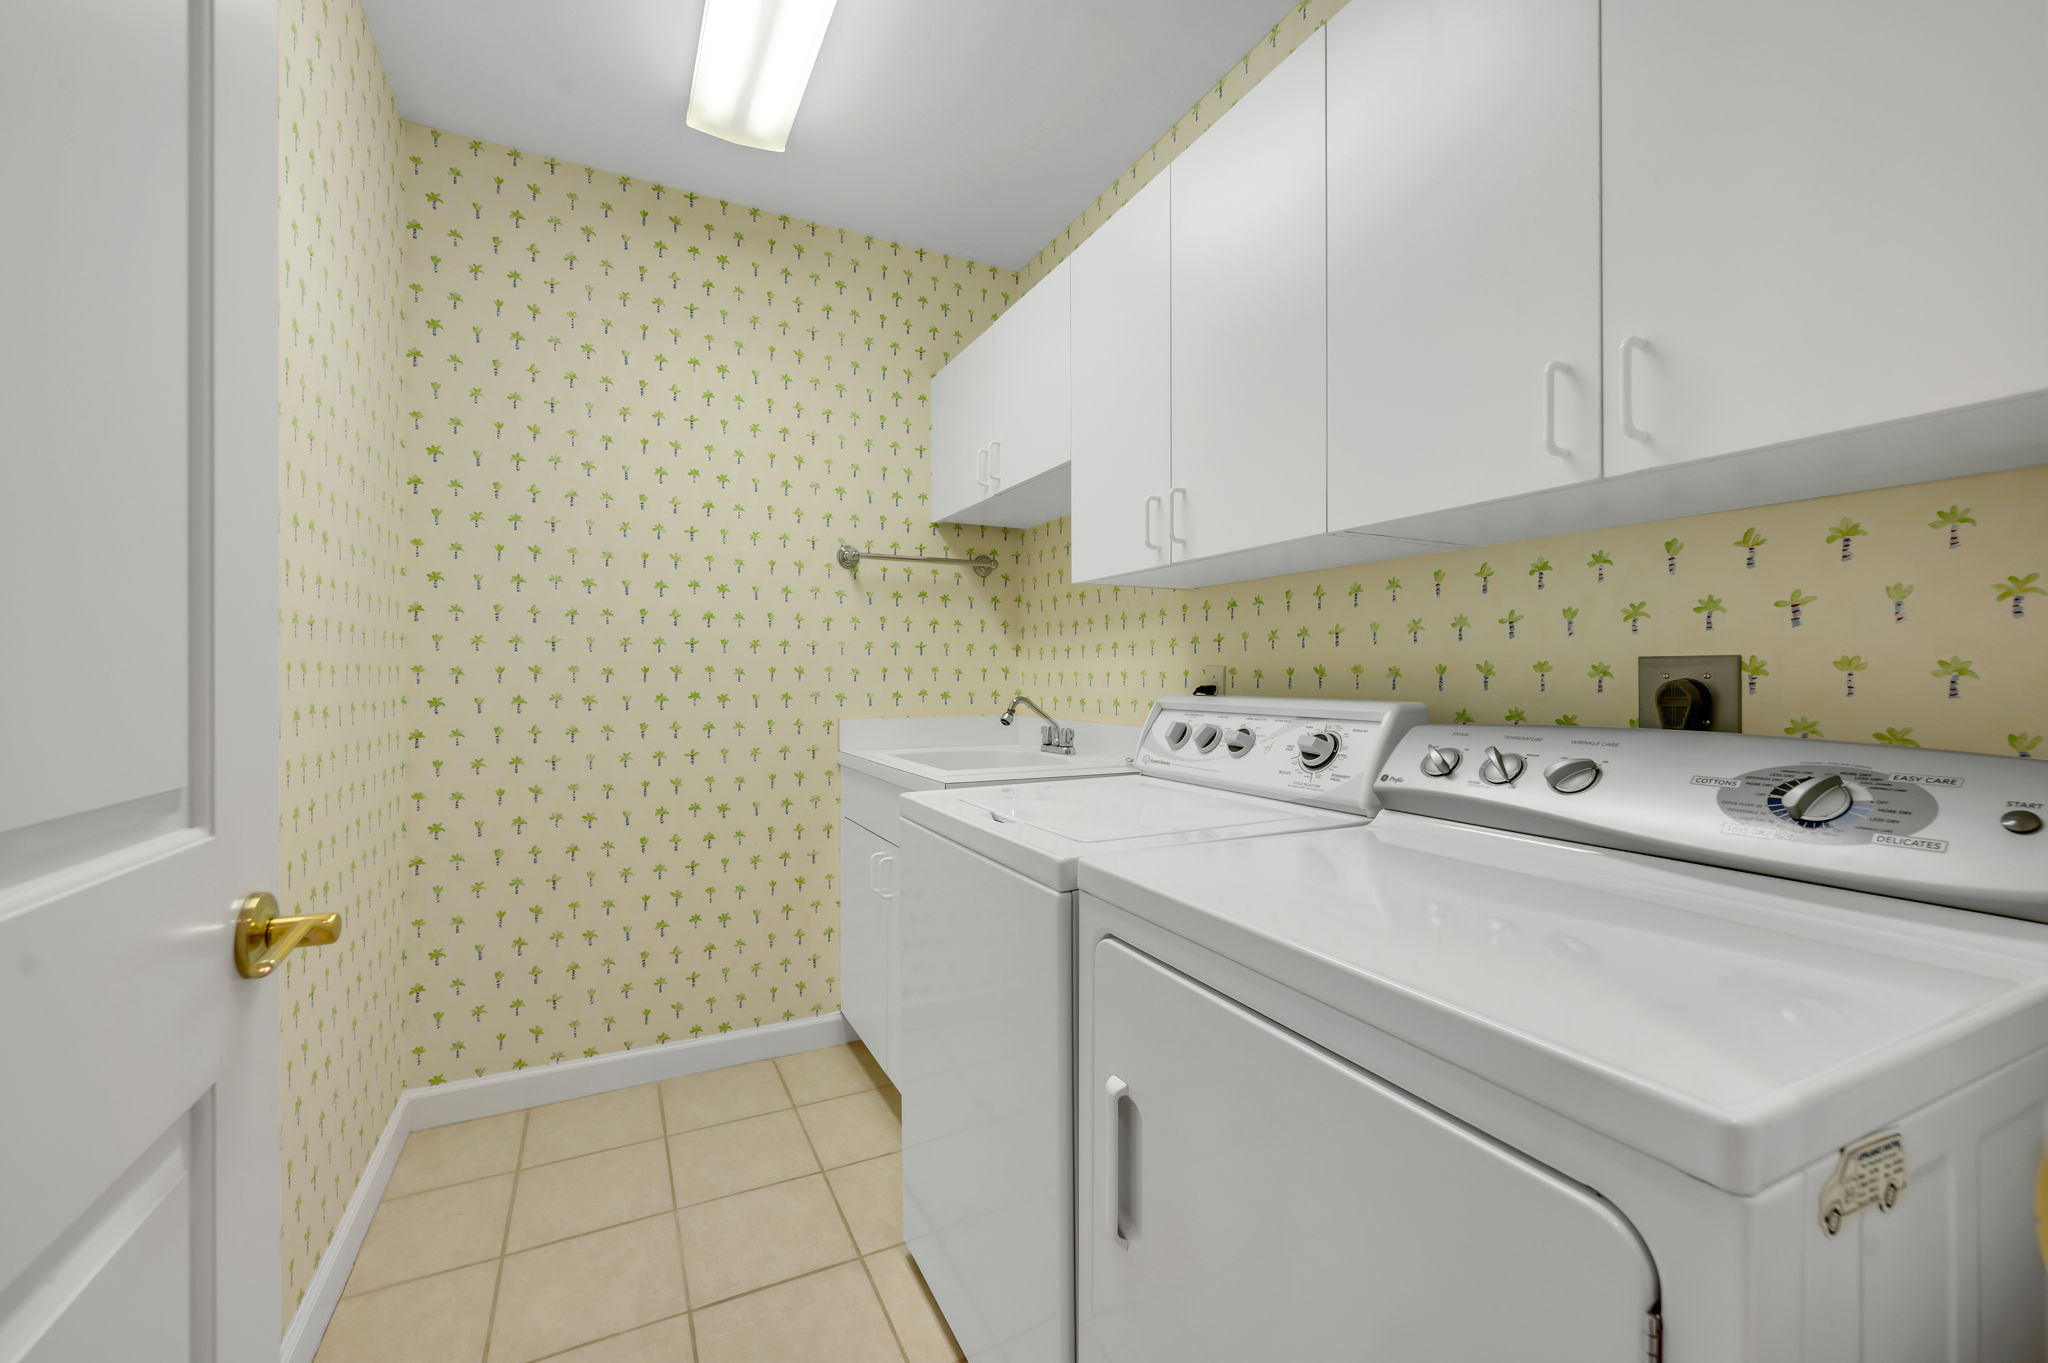 Laundry Room off of the kitchen